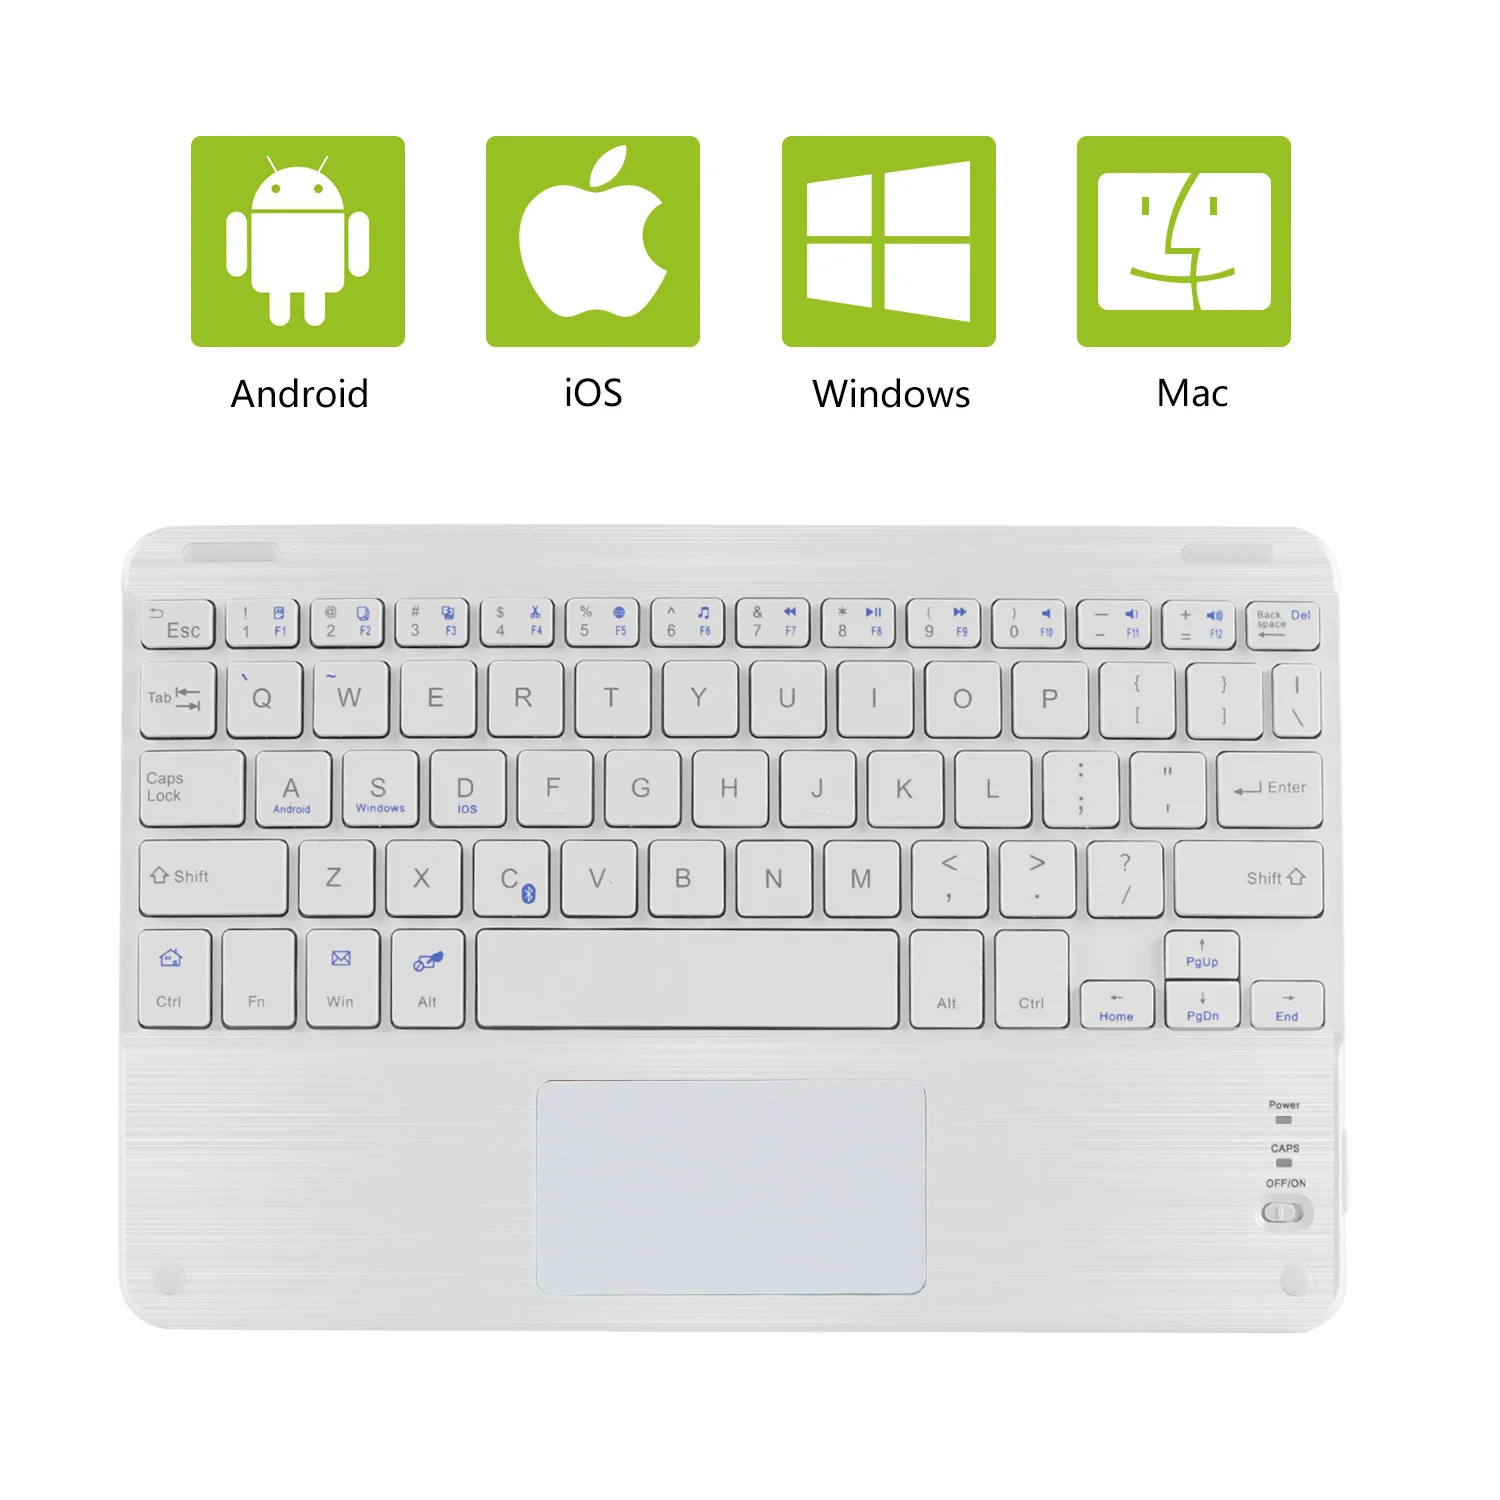 

9 Inch Wireless Bluetooth Ergonomic Rechargeable Keyboard with Touchpad Keypad for Tablet Pc Laptop Smartphone IPad IOS Android